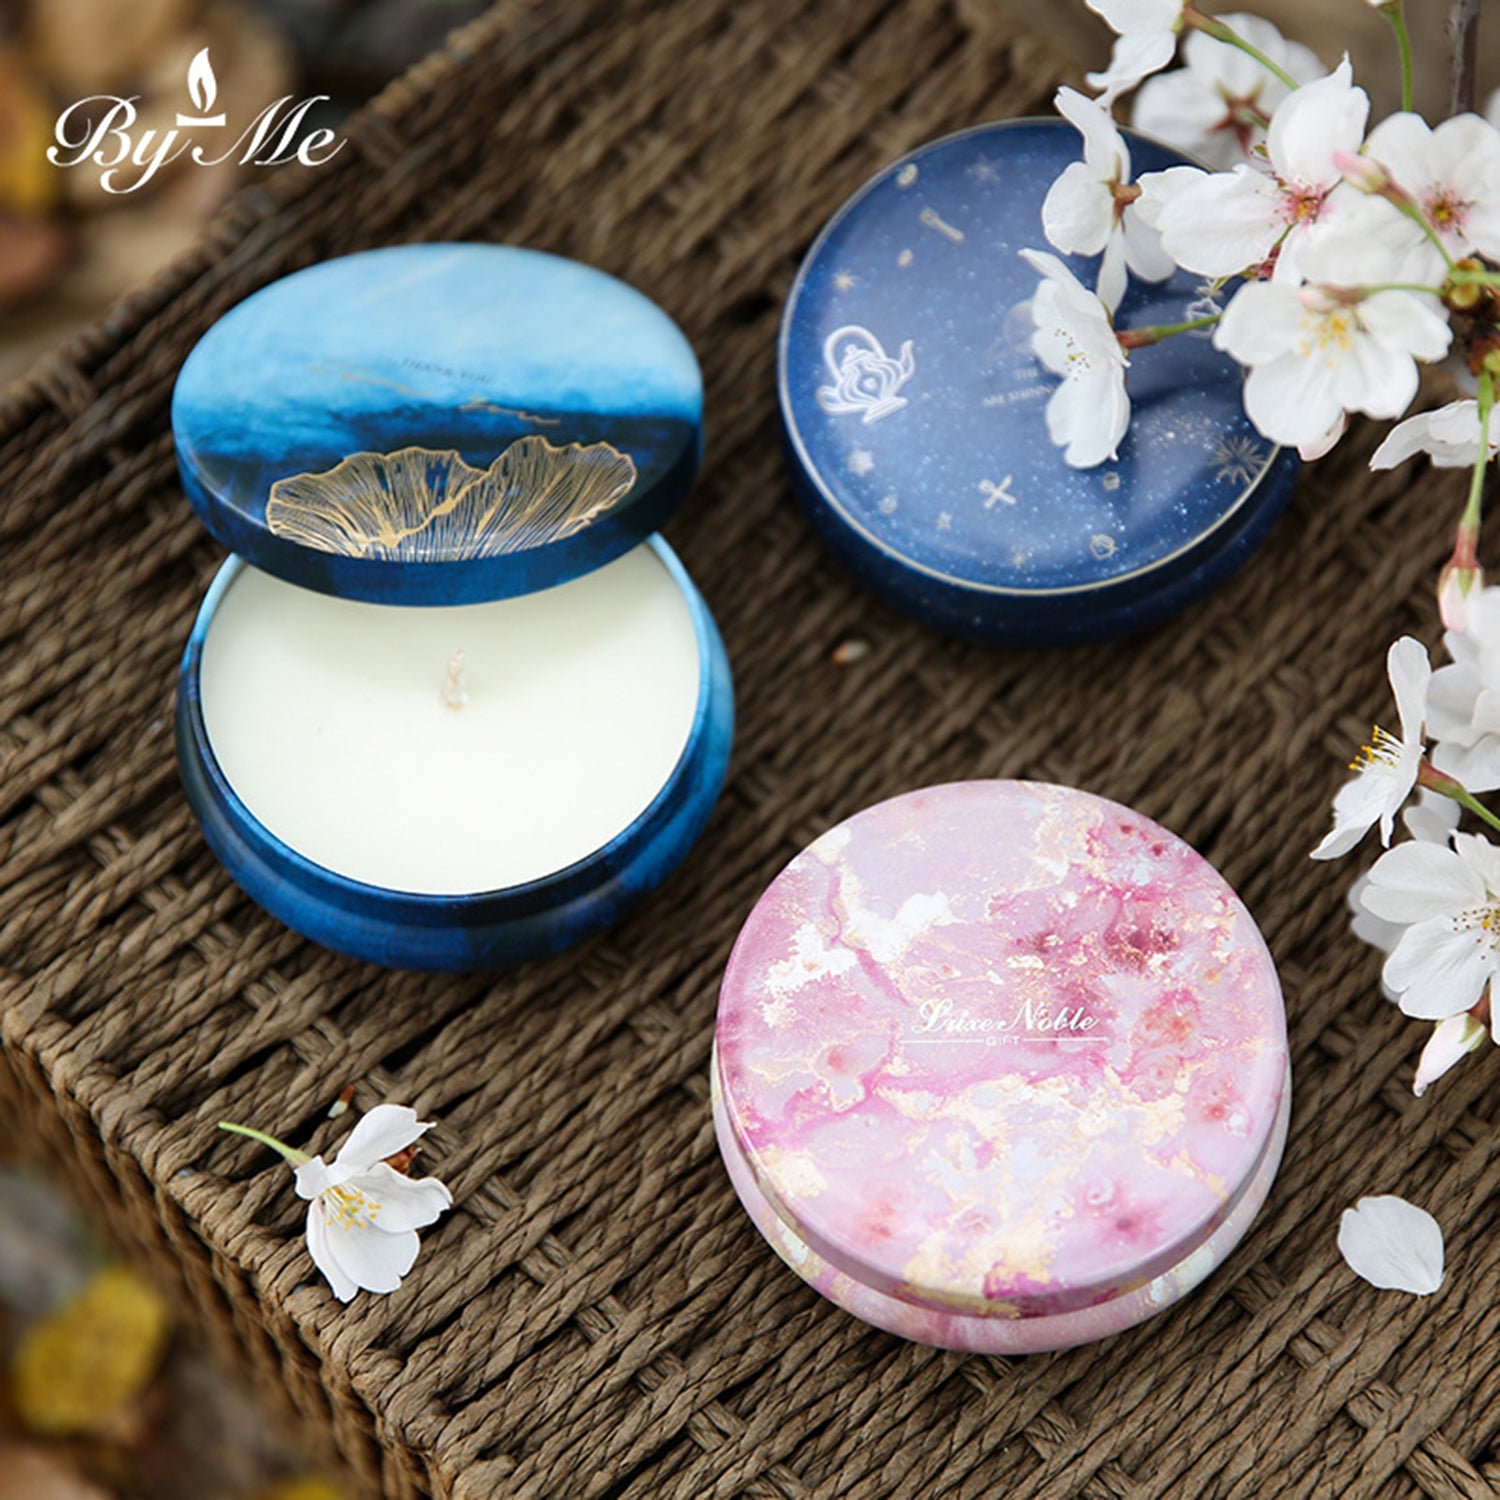 BYME Scented Candle Soy Wax Flat Tin Can Handmade Romantic Aromatherapy Candle Gift Ideas Scented Candle BYME 